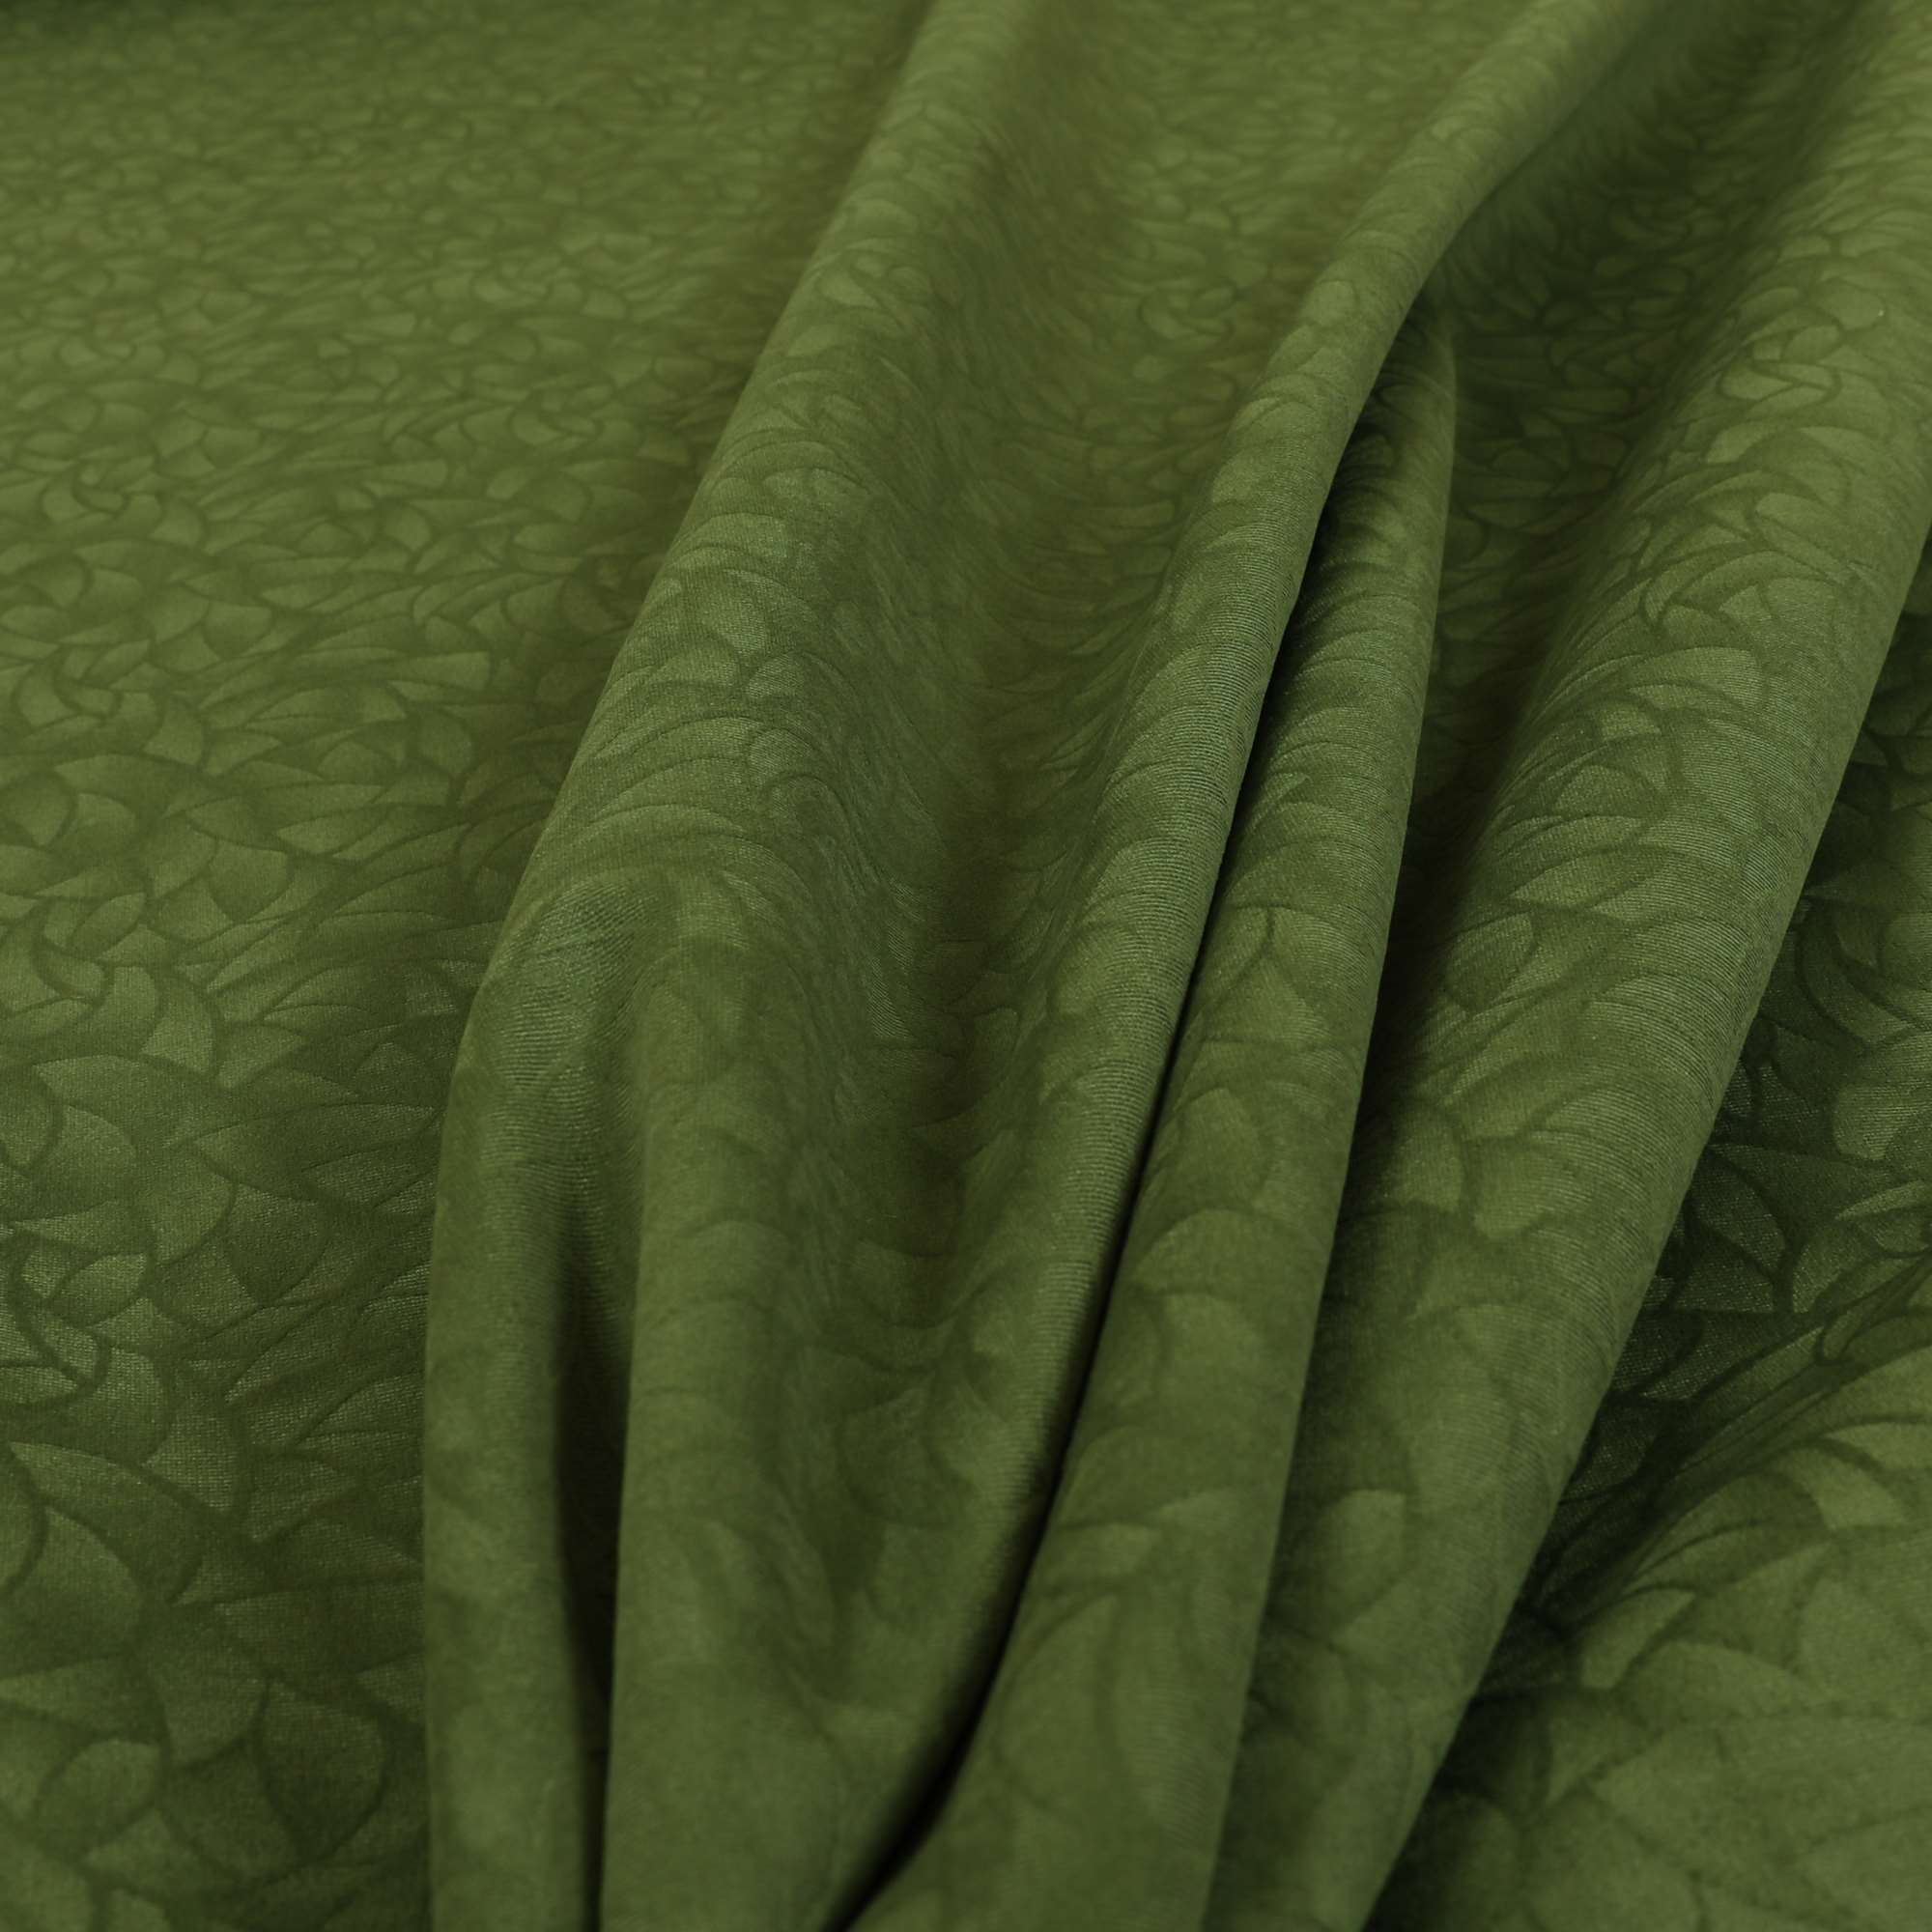 Subtle Embossed Velour Upholstery Fabric for Curtains - Etsy UK